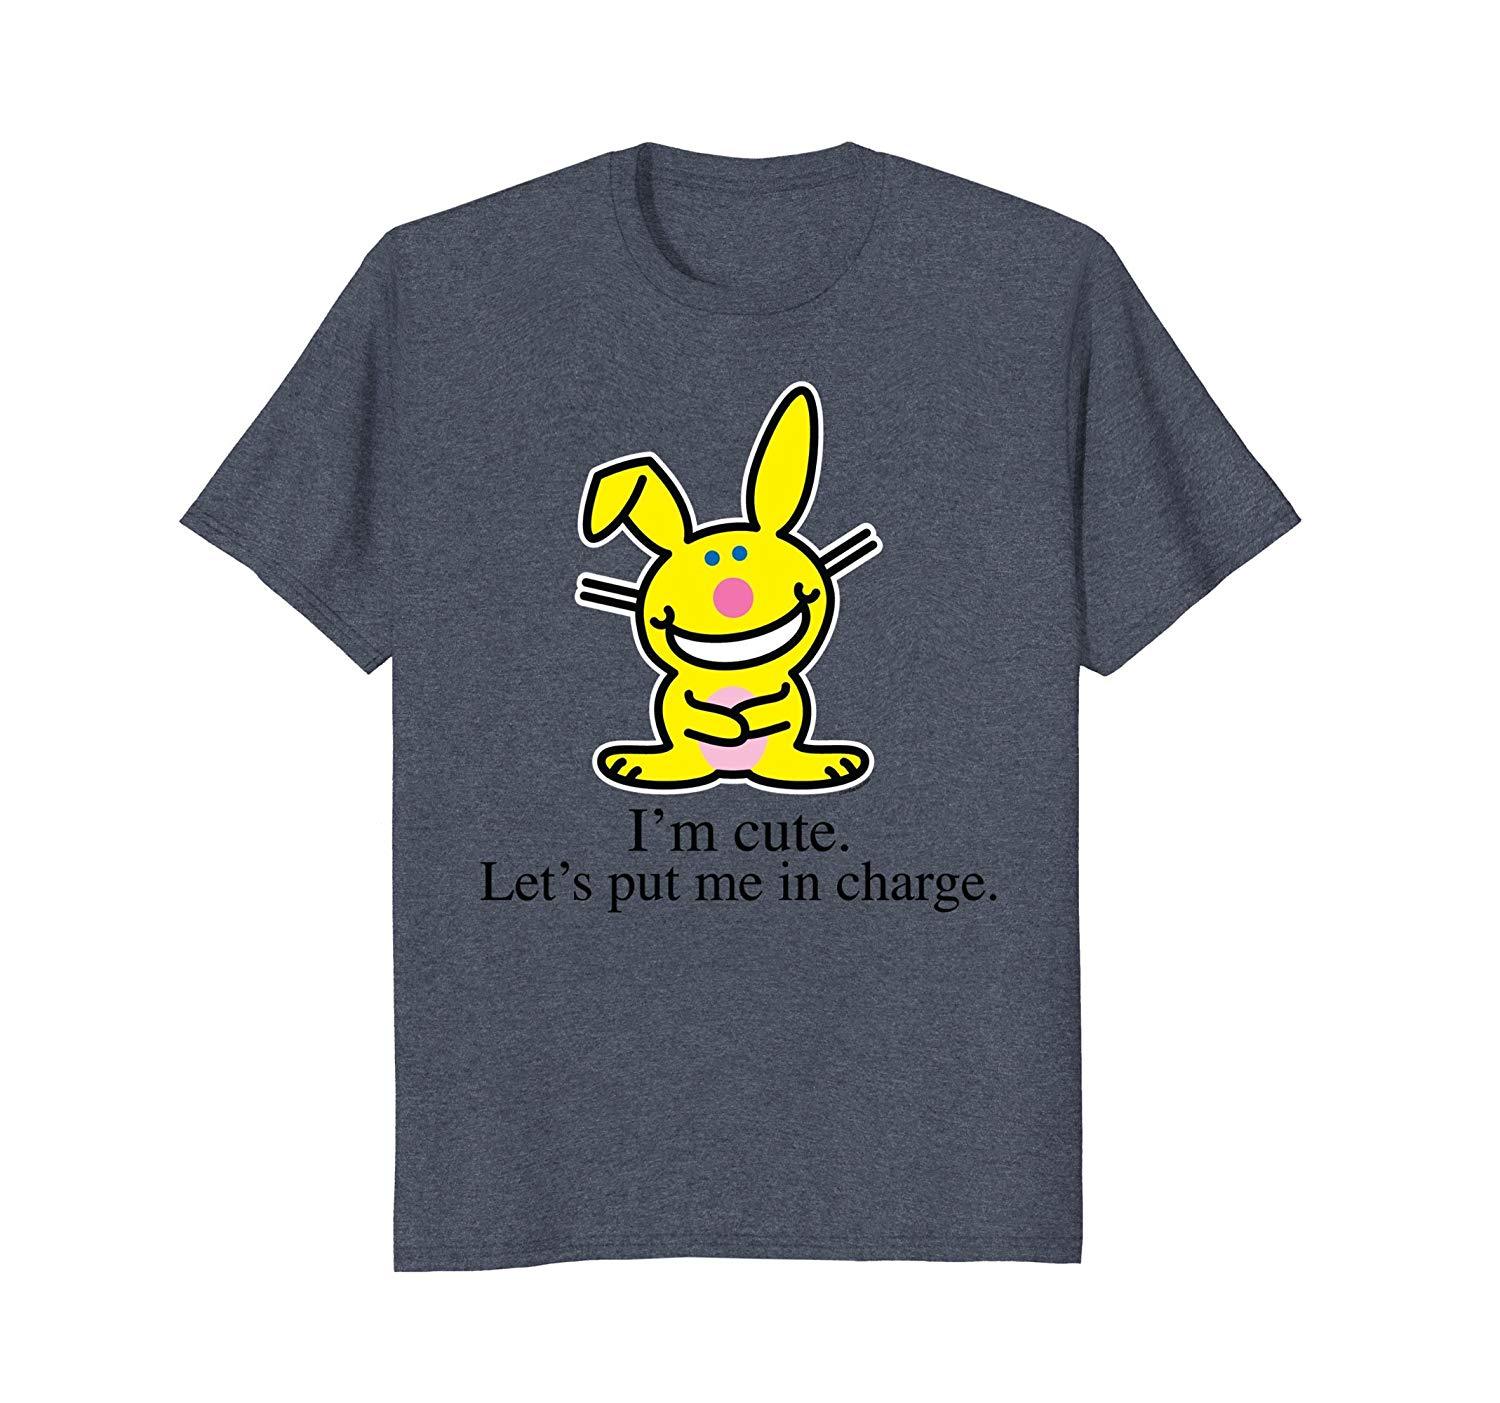 New Shirt - It's Happy Bunny I'm cute. Let's put me in charge. Men - T ...